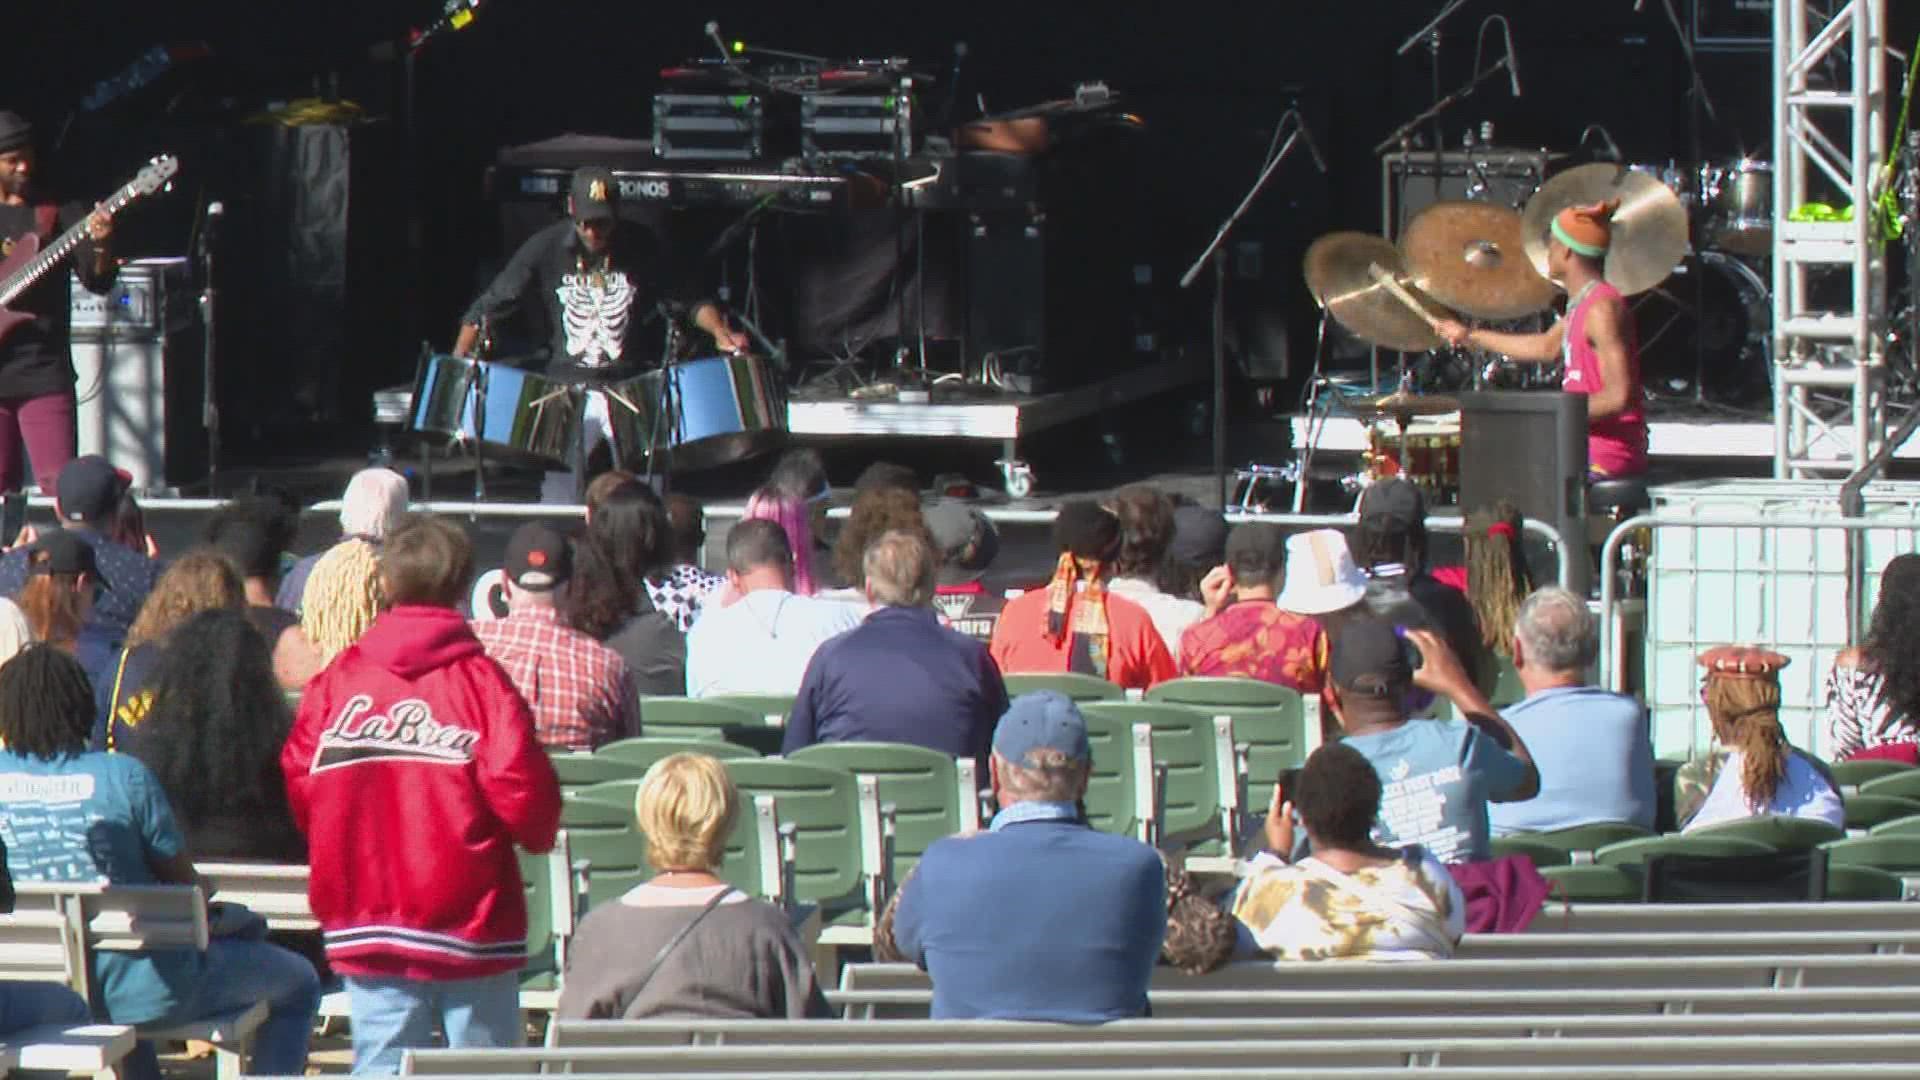 Jazz Fest started Friday and will end at midnight on Sunday.